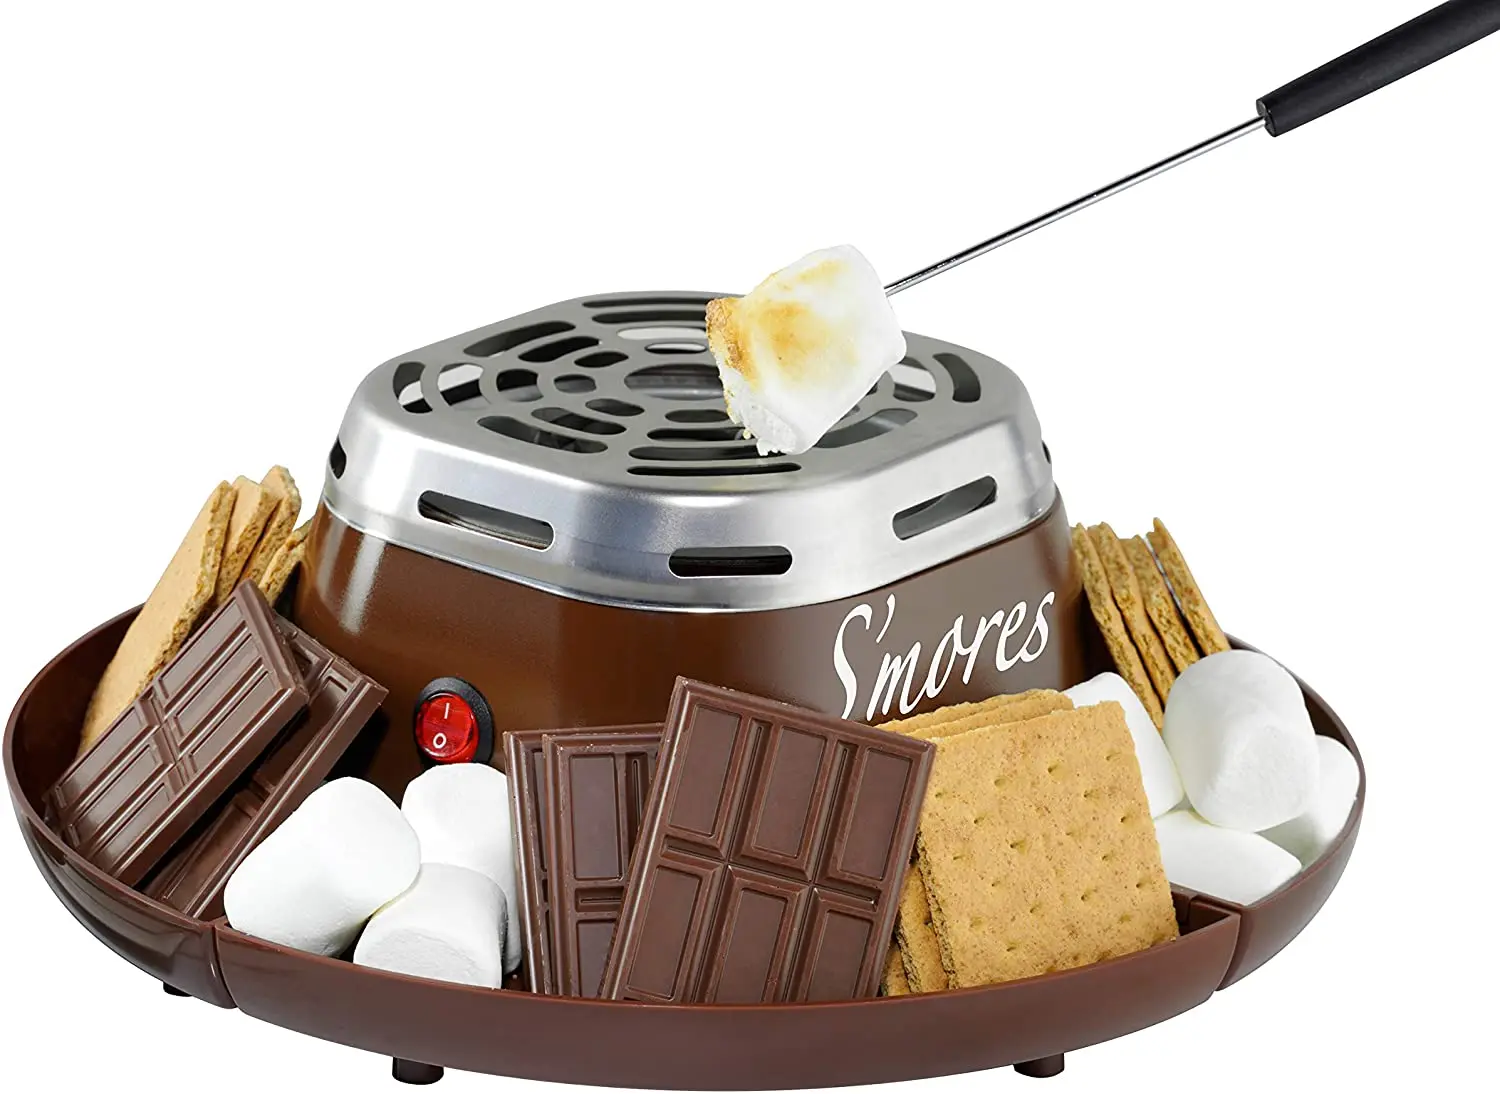 Nostalgic indoor electric stainless steel s'mores manufacturing machine with 4 compartment trays for Graham biscuits, clothes